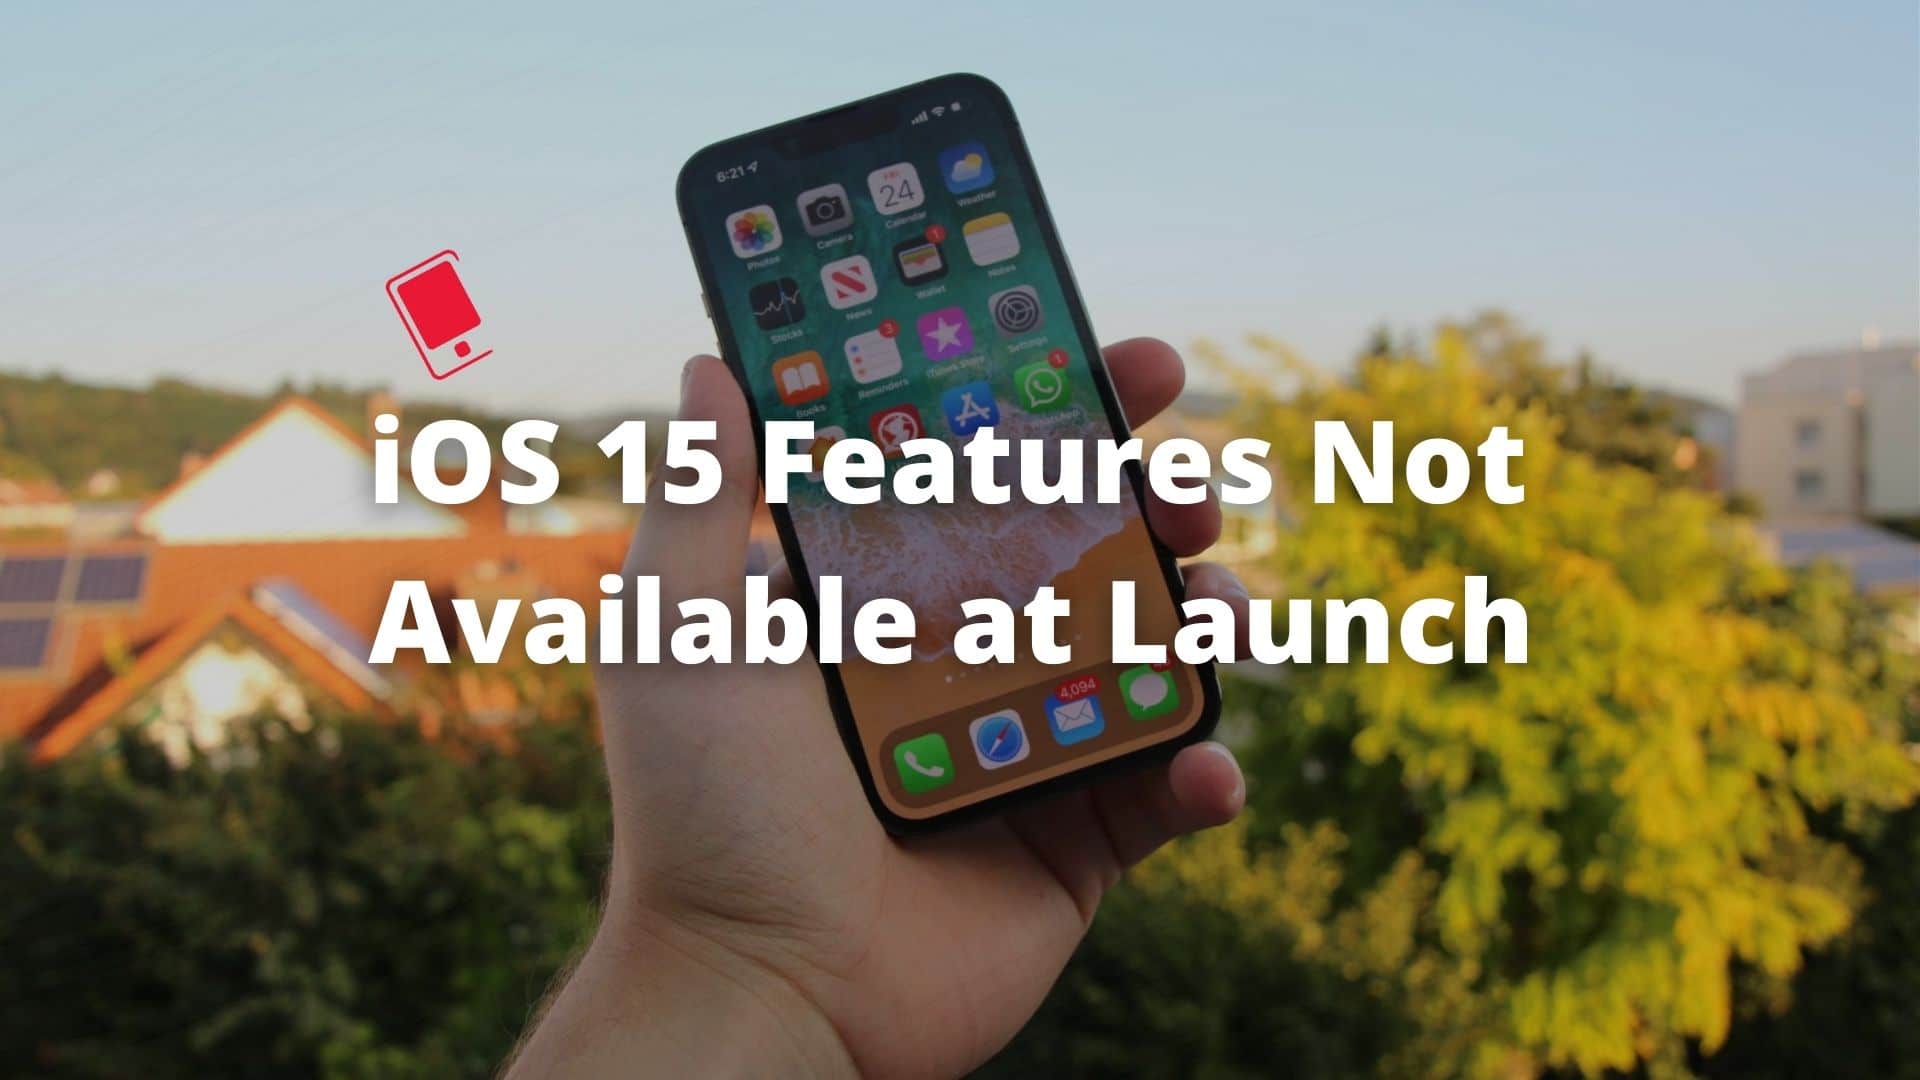 iOS 15 Features not available at launch